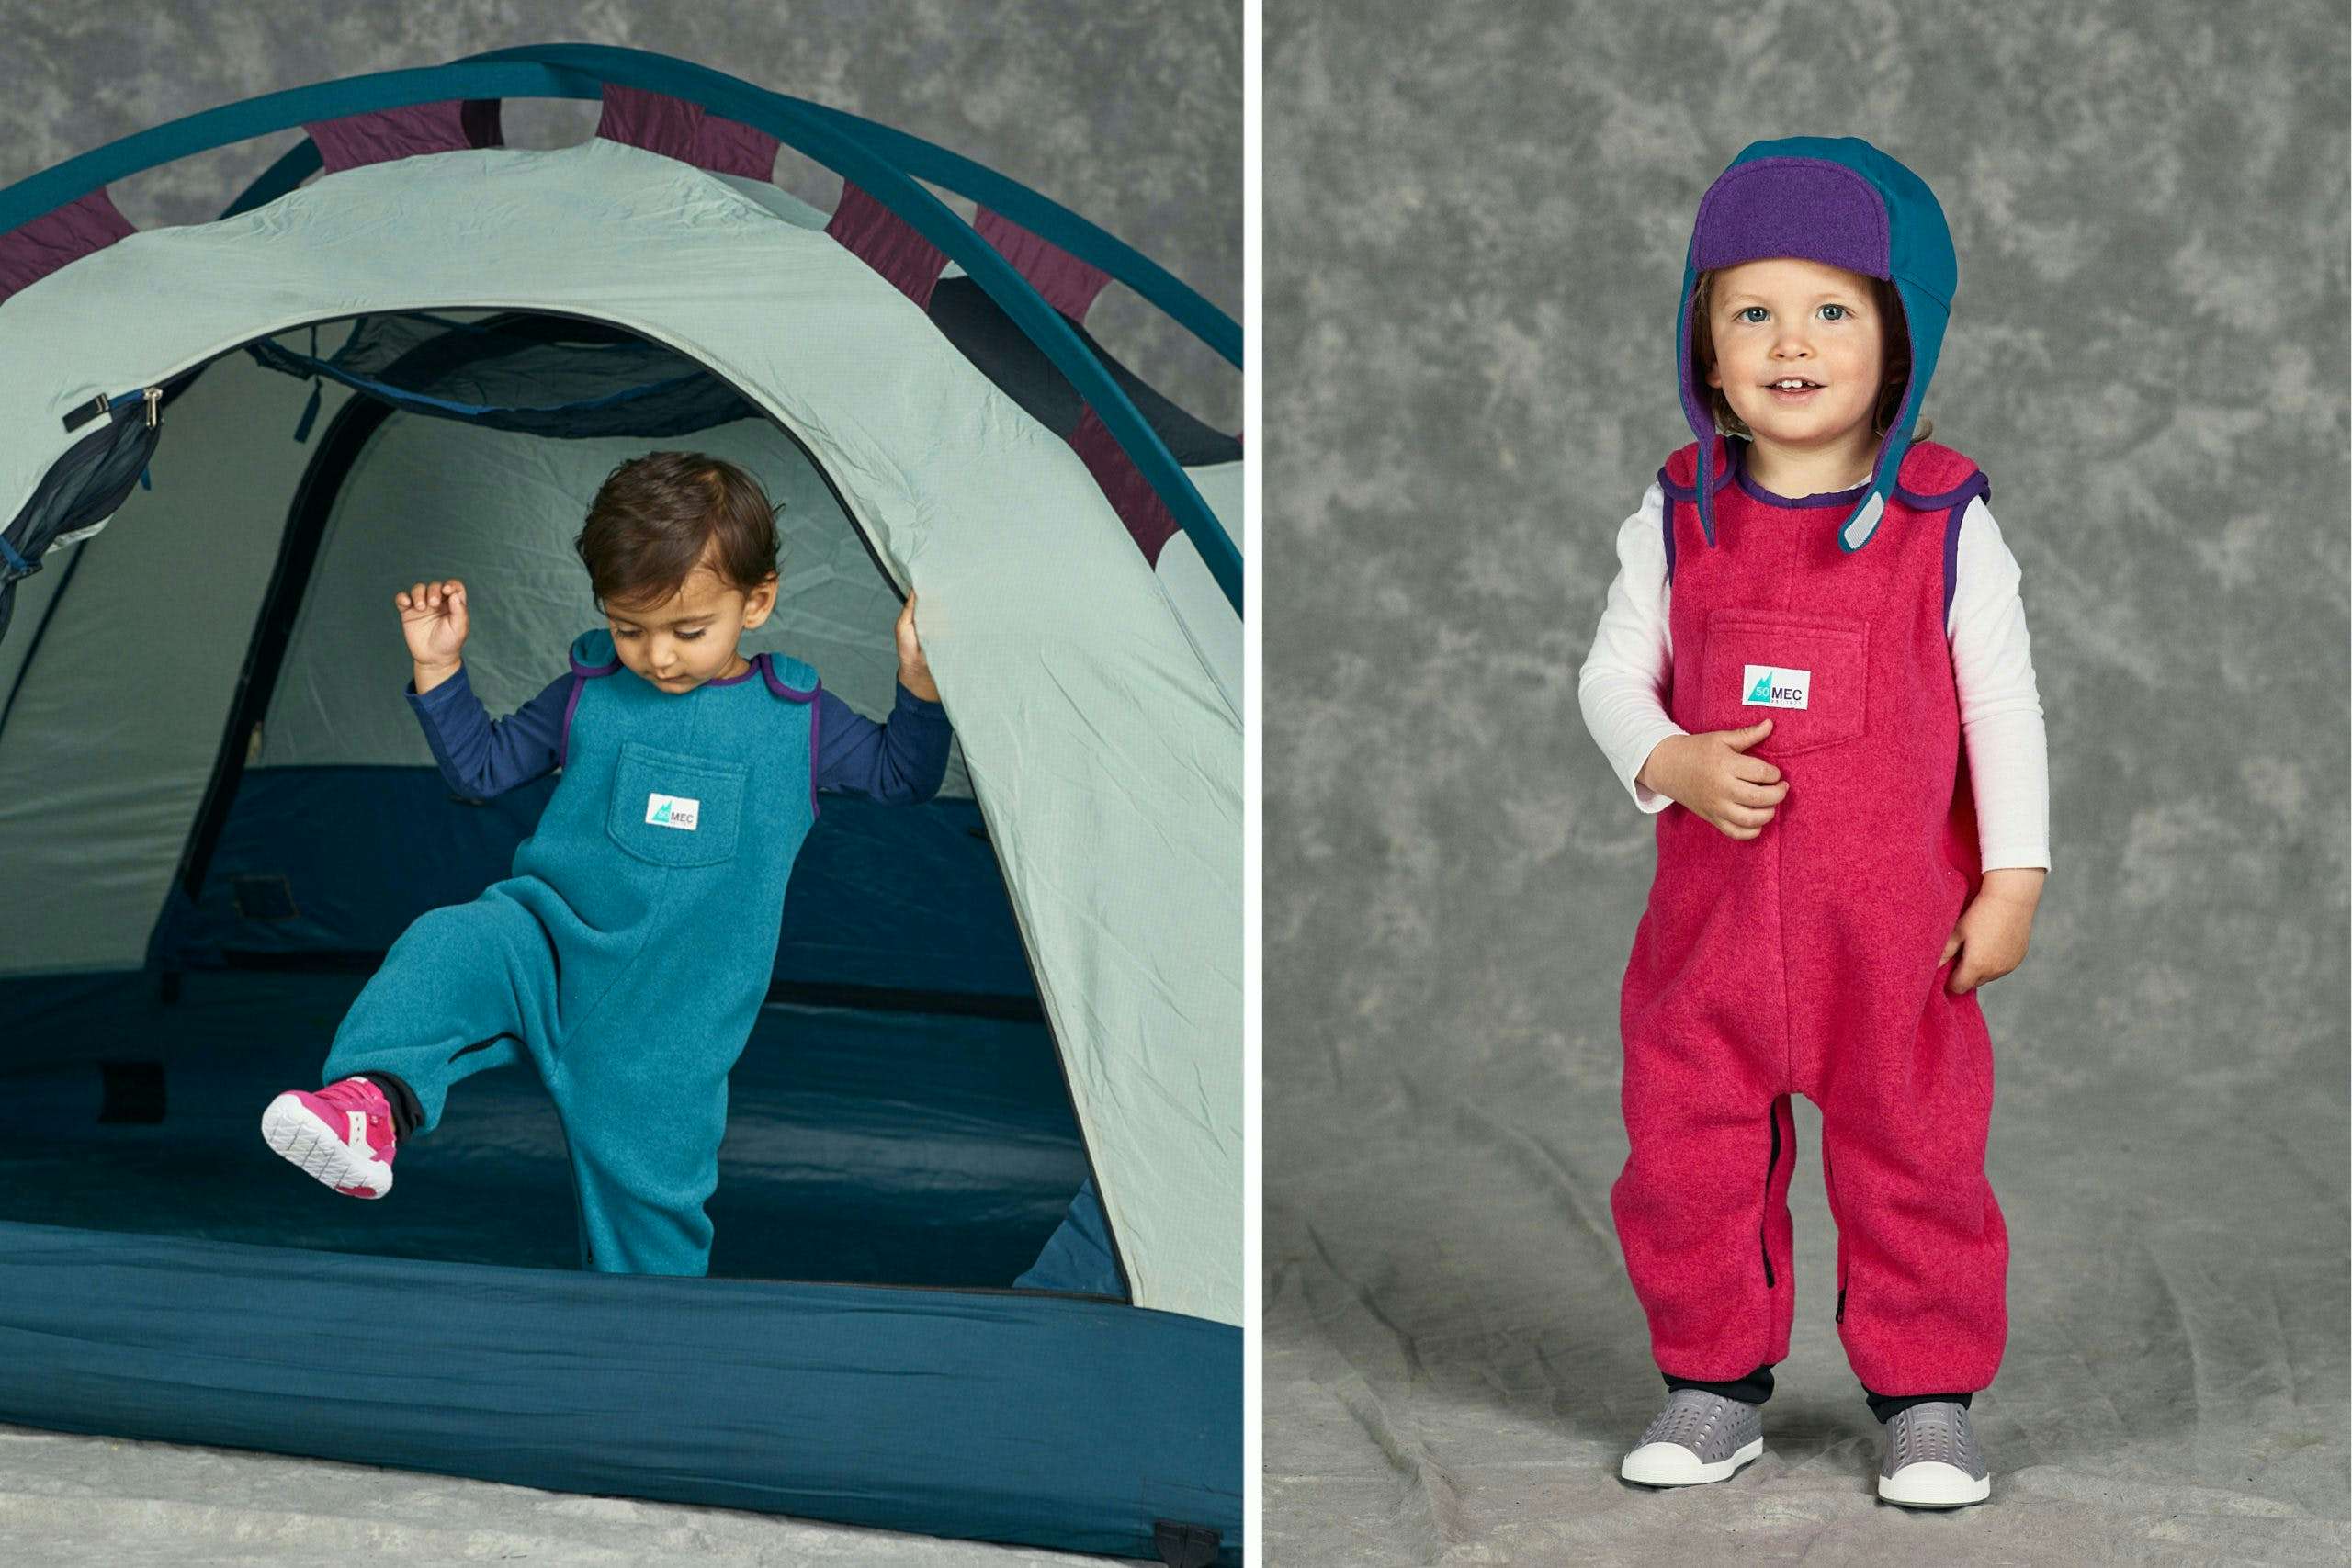 Two young kids wearing fleece overalls in a photo studio; the overalls are teal and pink